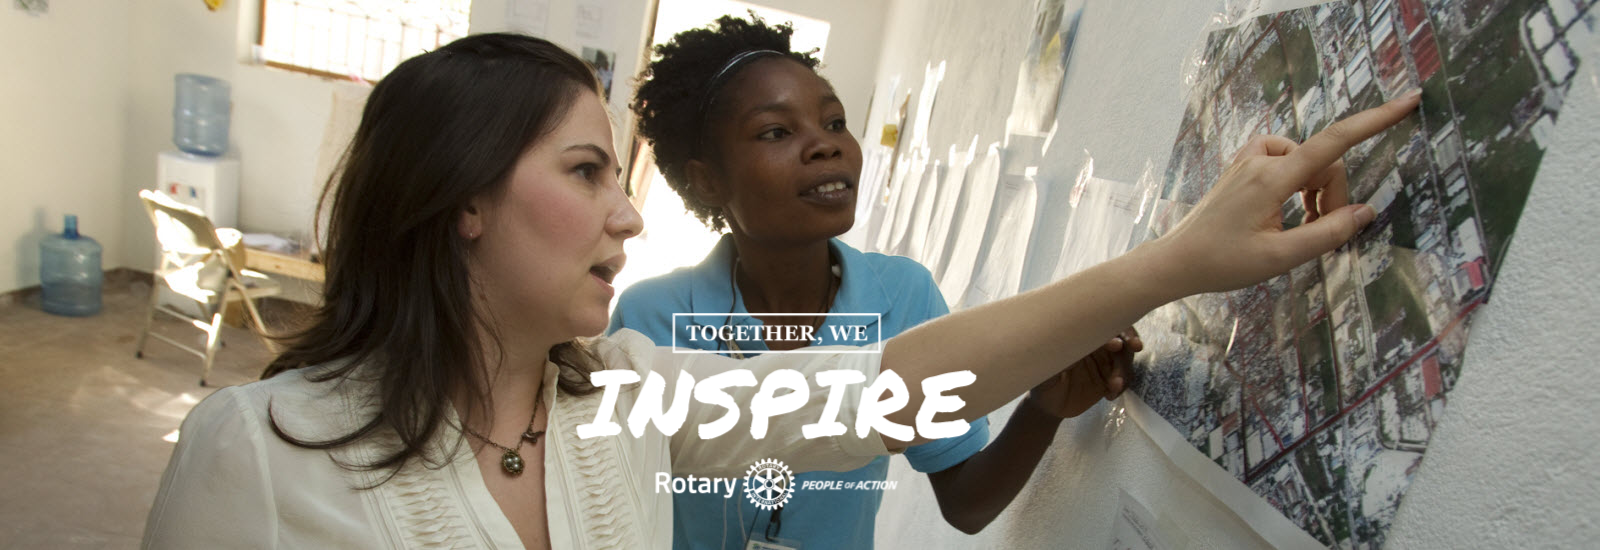 poaphoto-Together-we-inspire.png